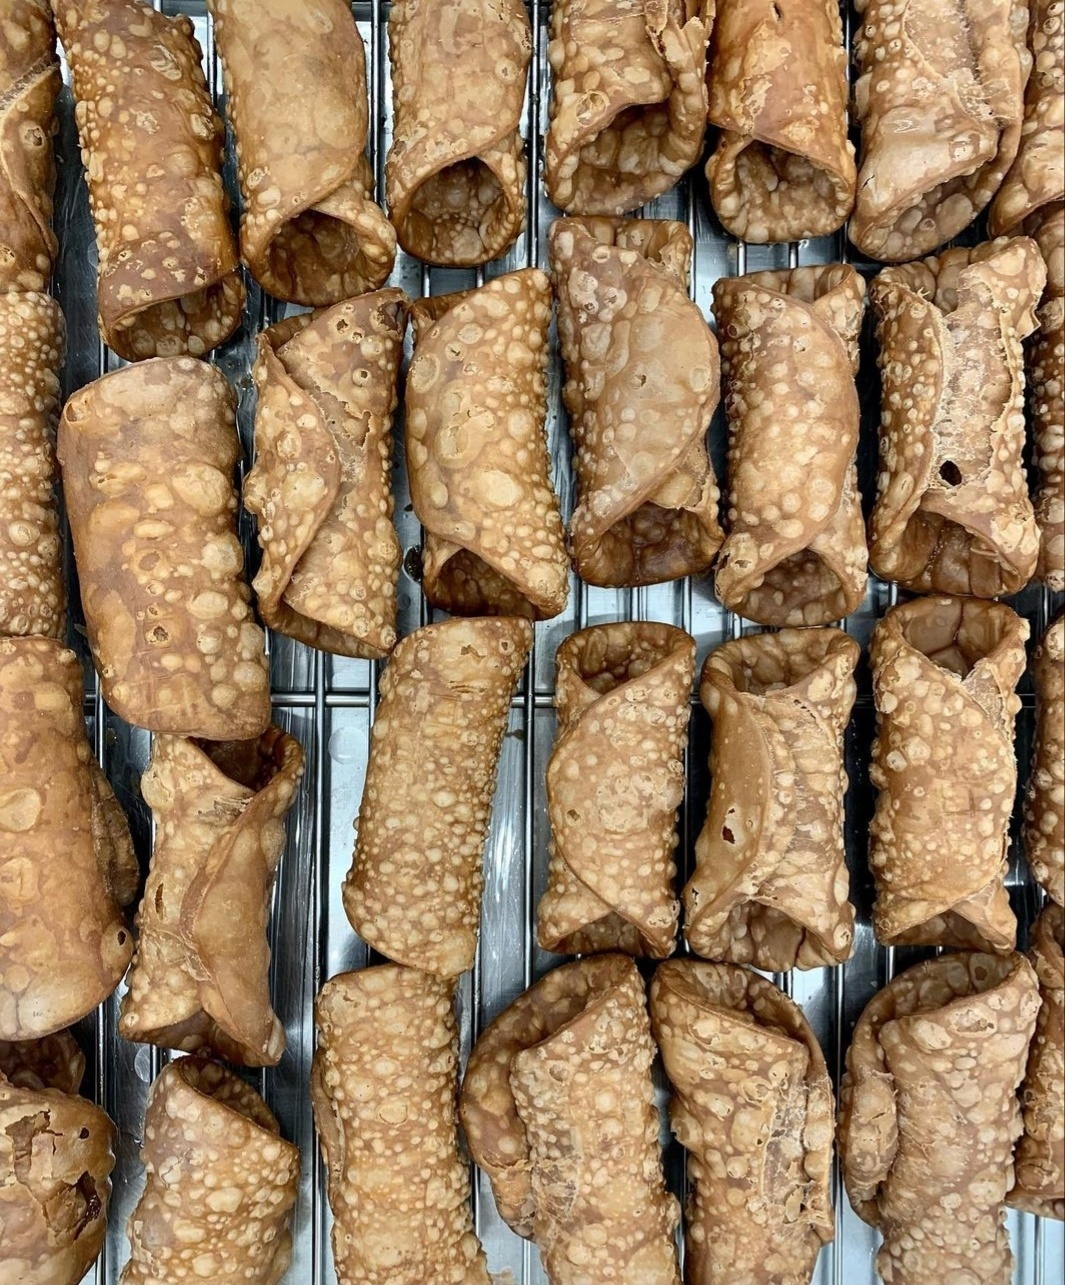 At Punto Dolce, the dough for cannoli is crafted using traditional ingredients like Marsala wine and cinnamon, before being shaped into dainty tubes and deep-fried. (Photo credit: Soojoo Kim)